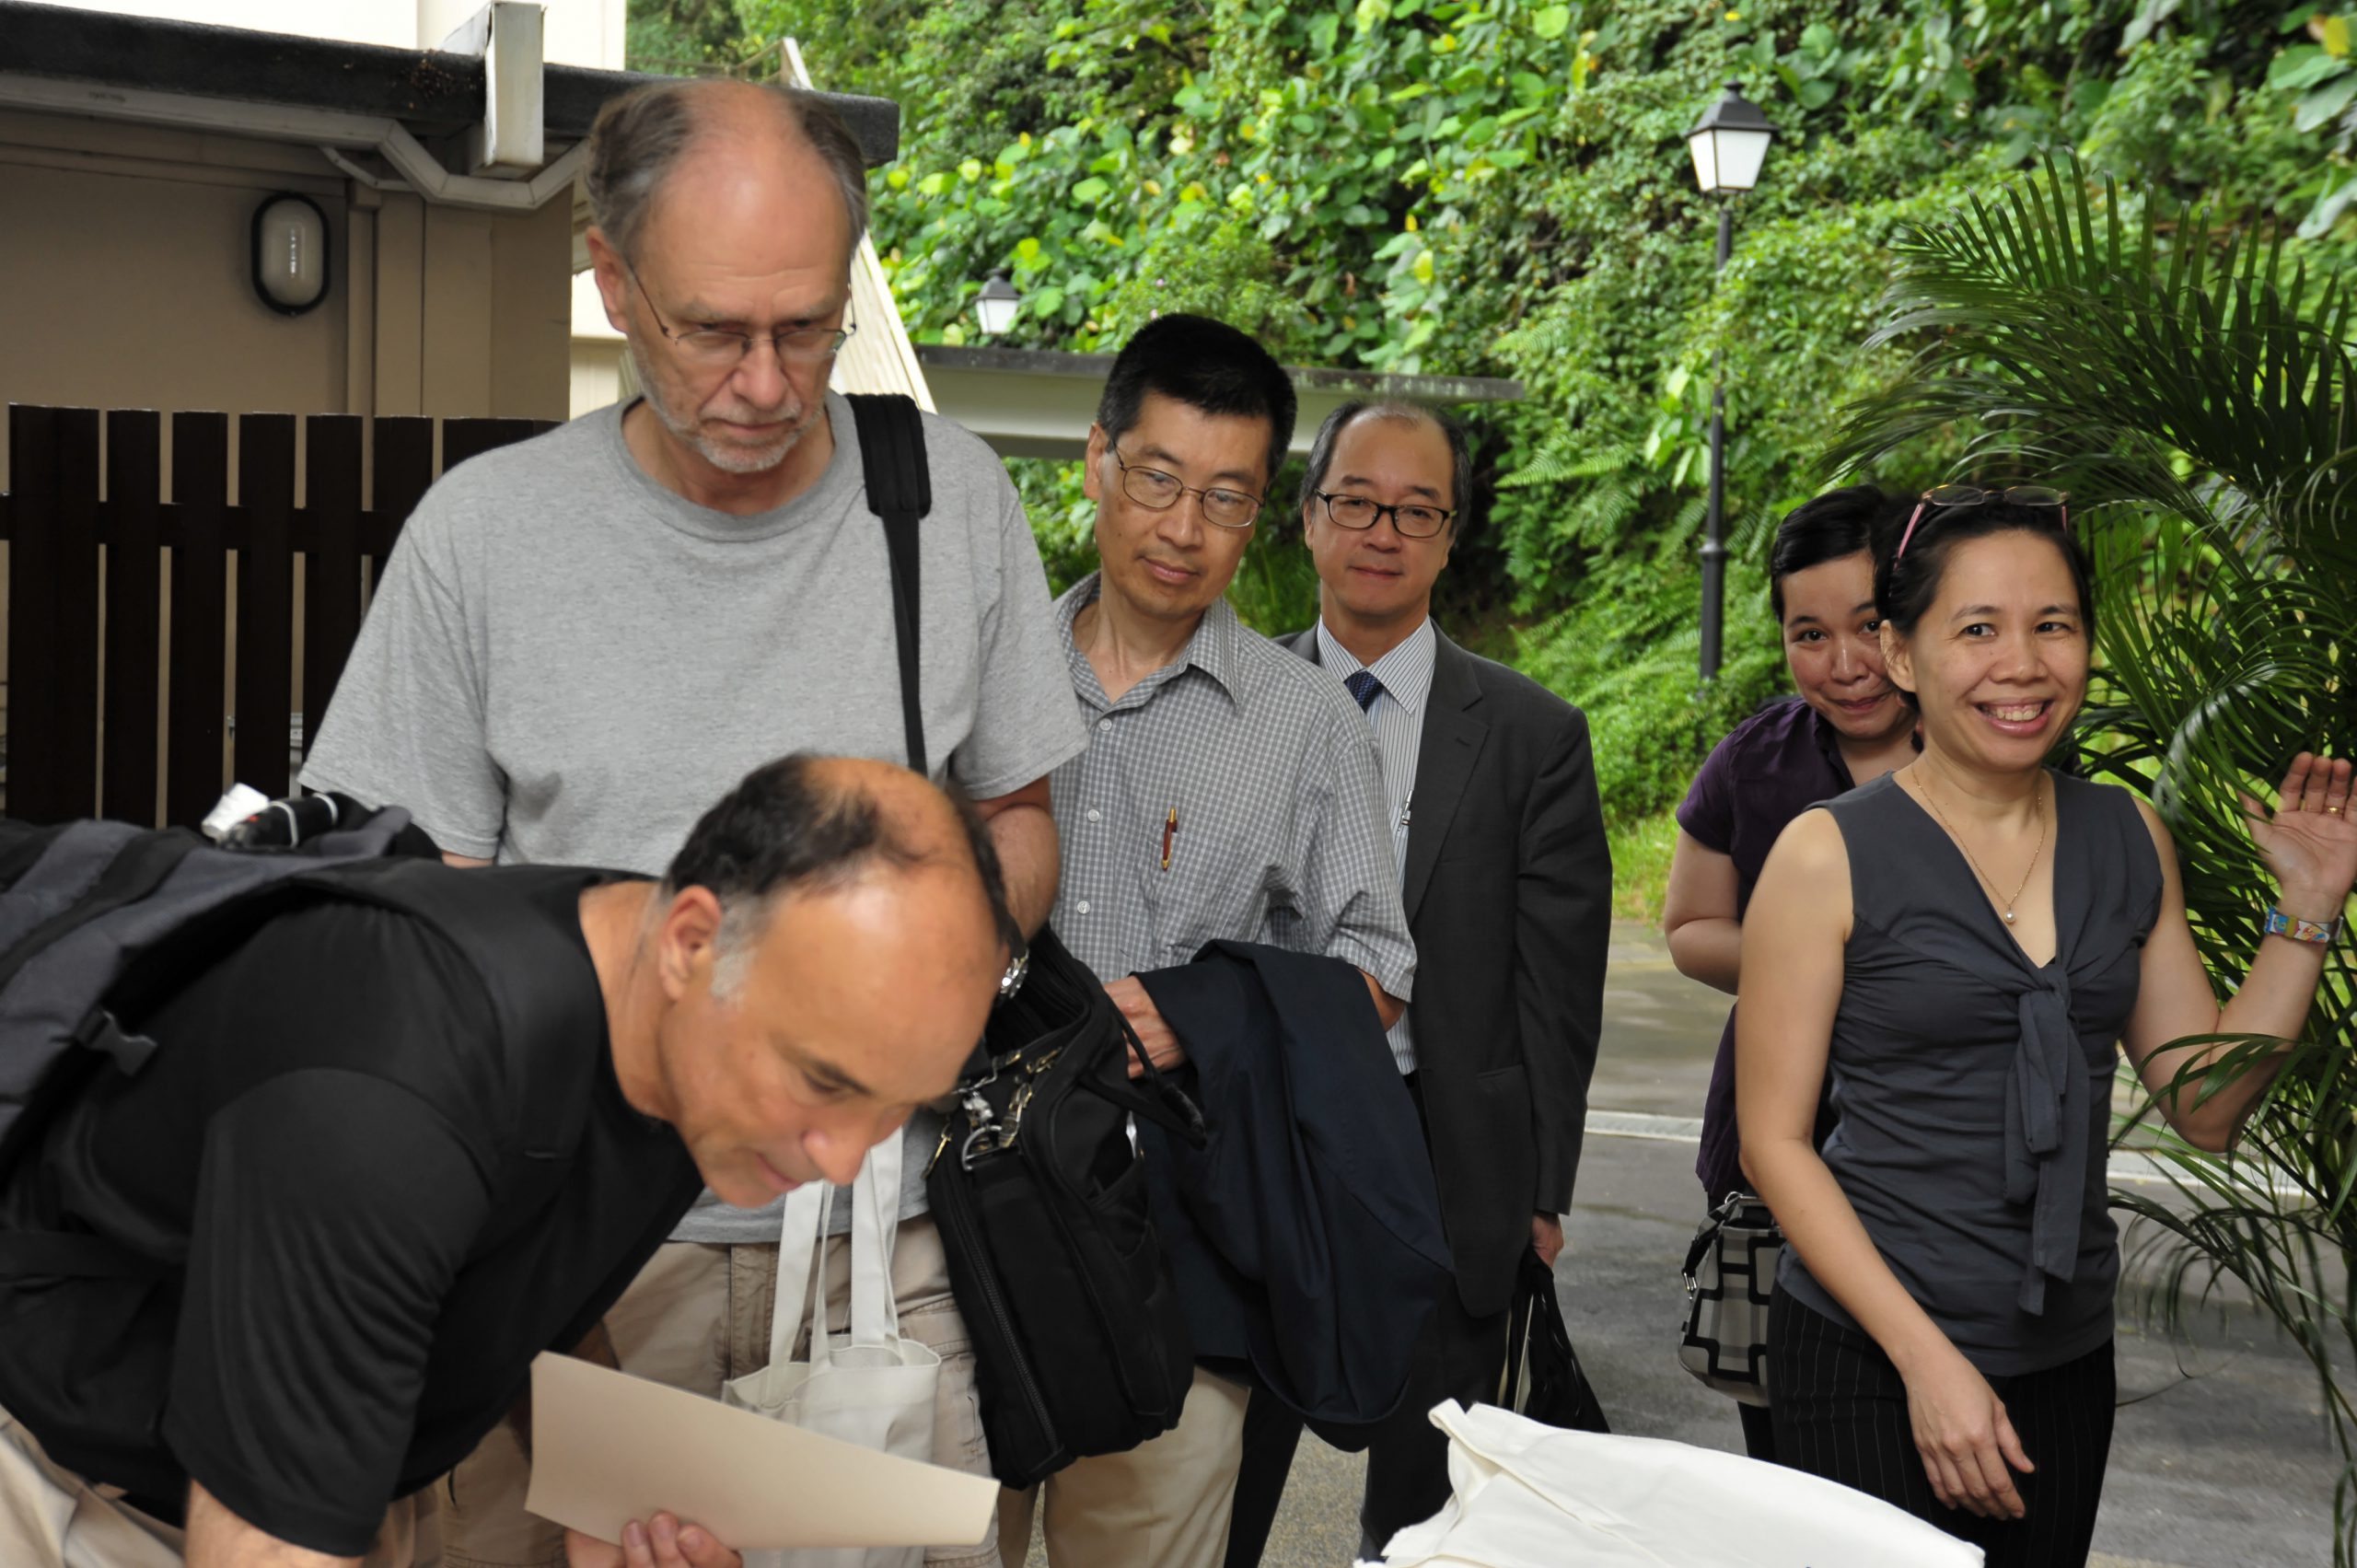 Guests signing in: (From left) Larry GOLDSTEIN, Michael WATERMAN, LOH Wei Yin , Tony CHAN, Mia PANG RAY, Ivy SUAN 